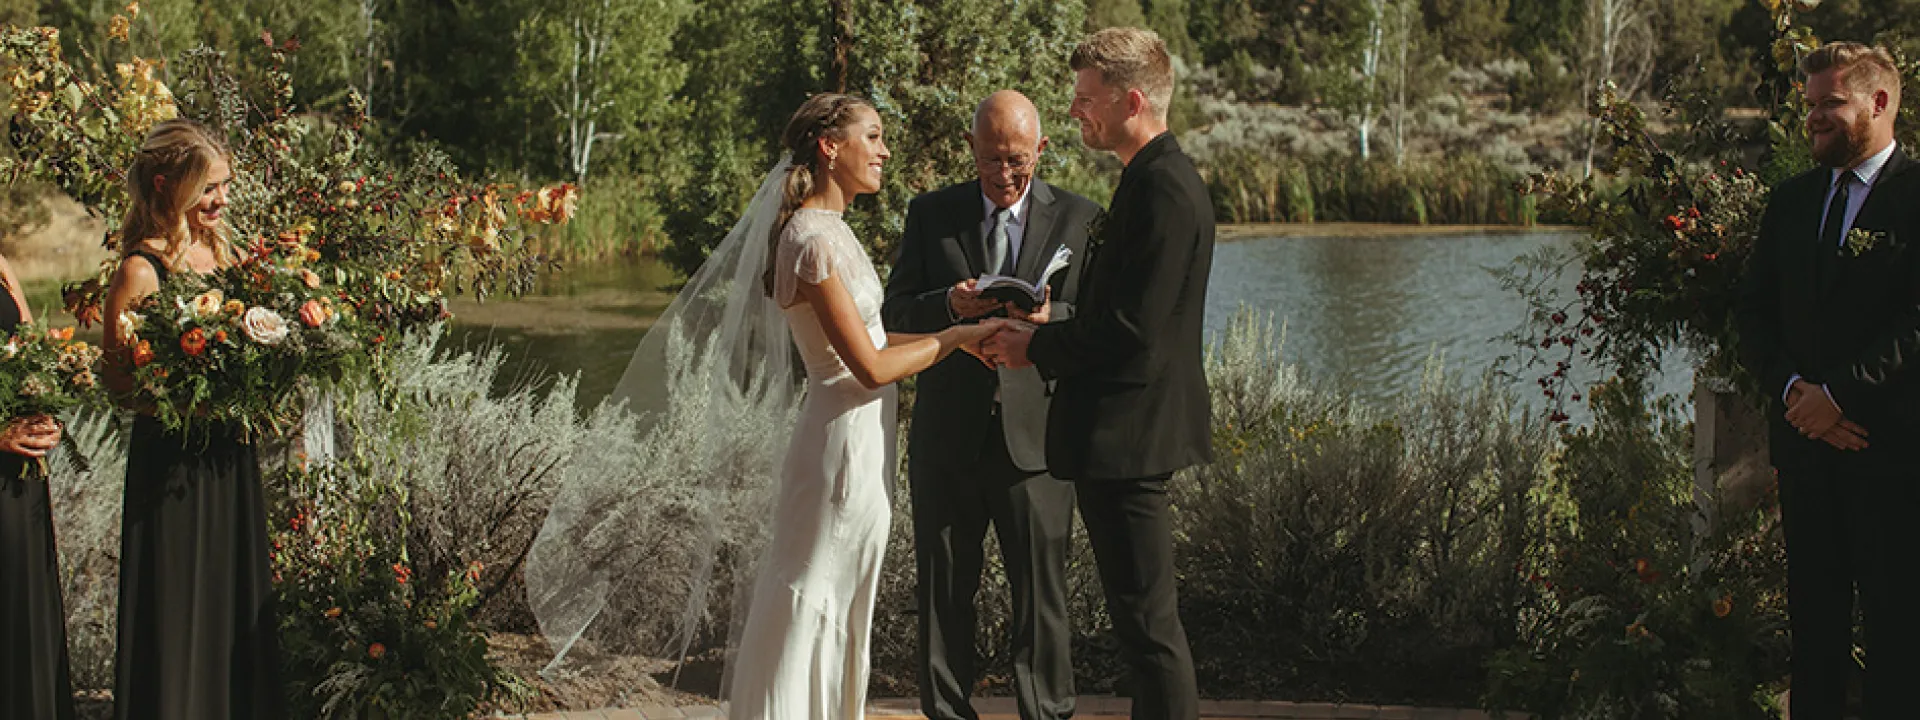 Gretchen and Tyler tie the knot at Ranch at the Canyons